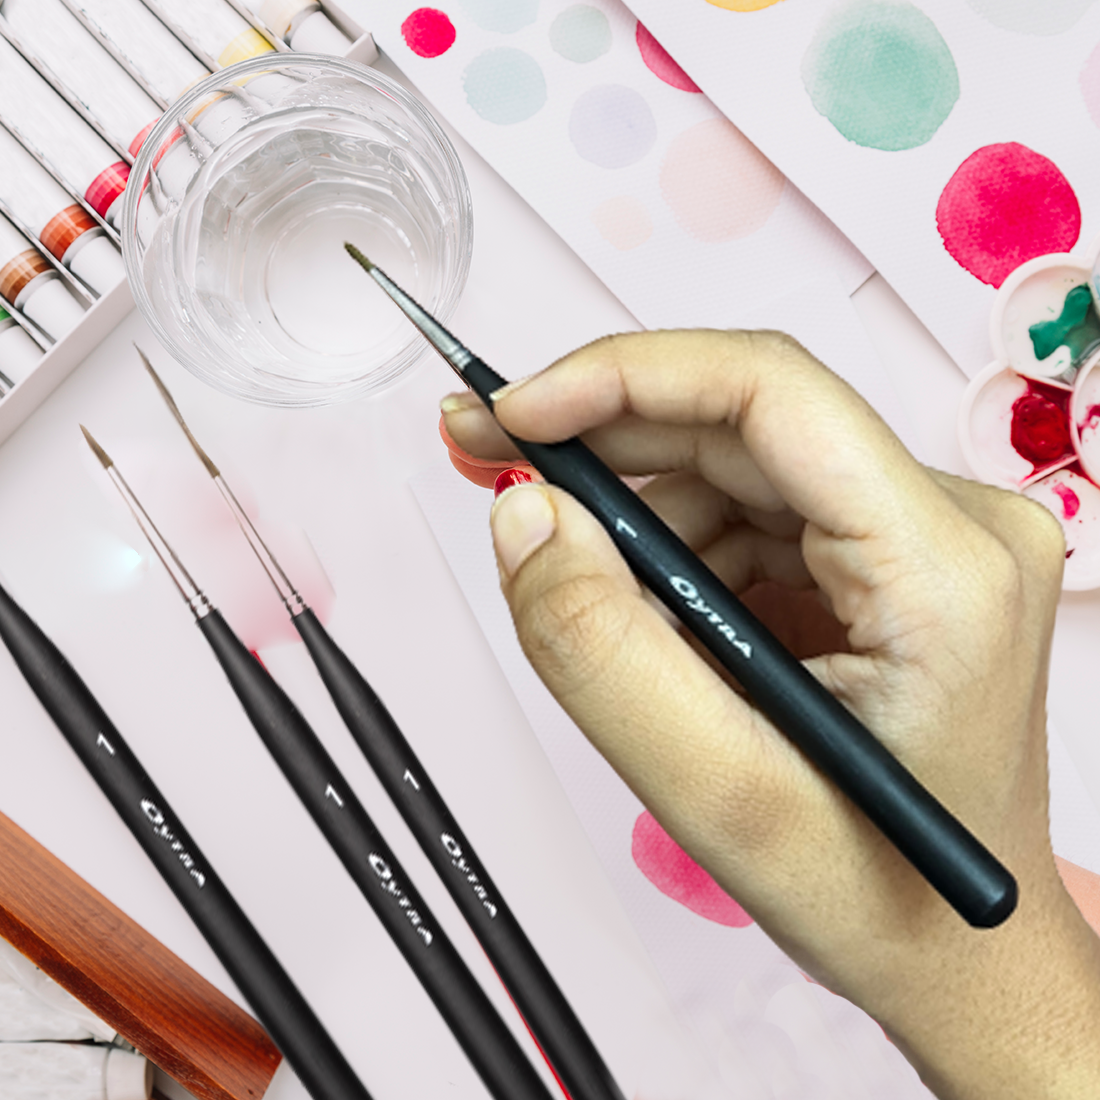 Pro Arte Brushes  Oil, Acrylic & Watercolour Brushes For Artists